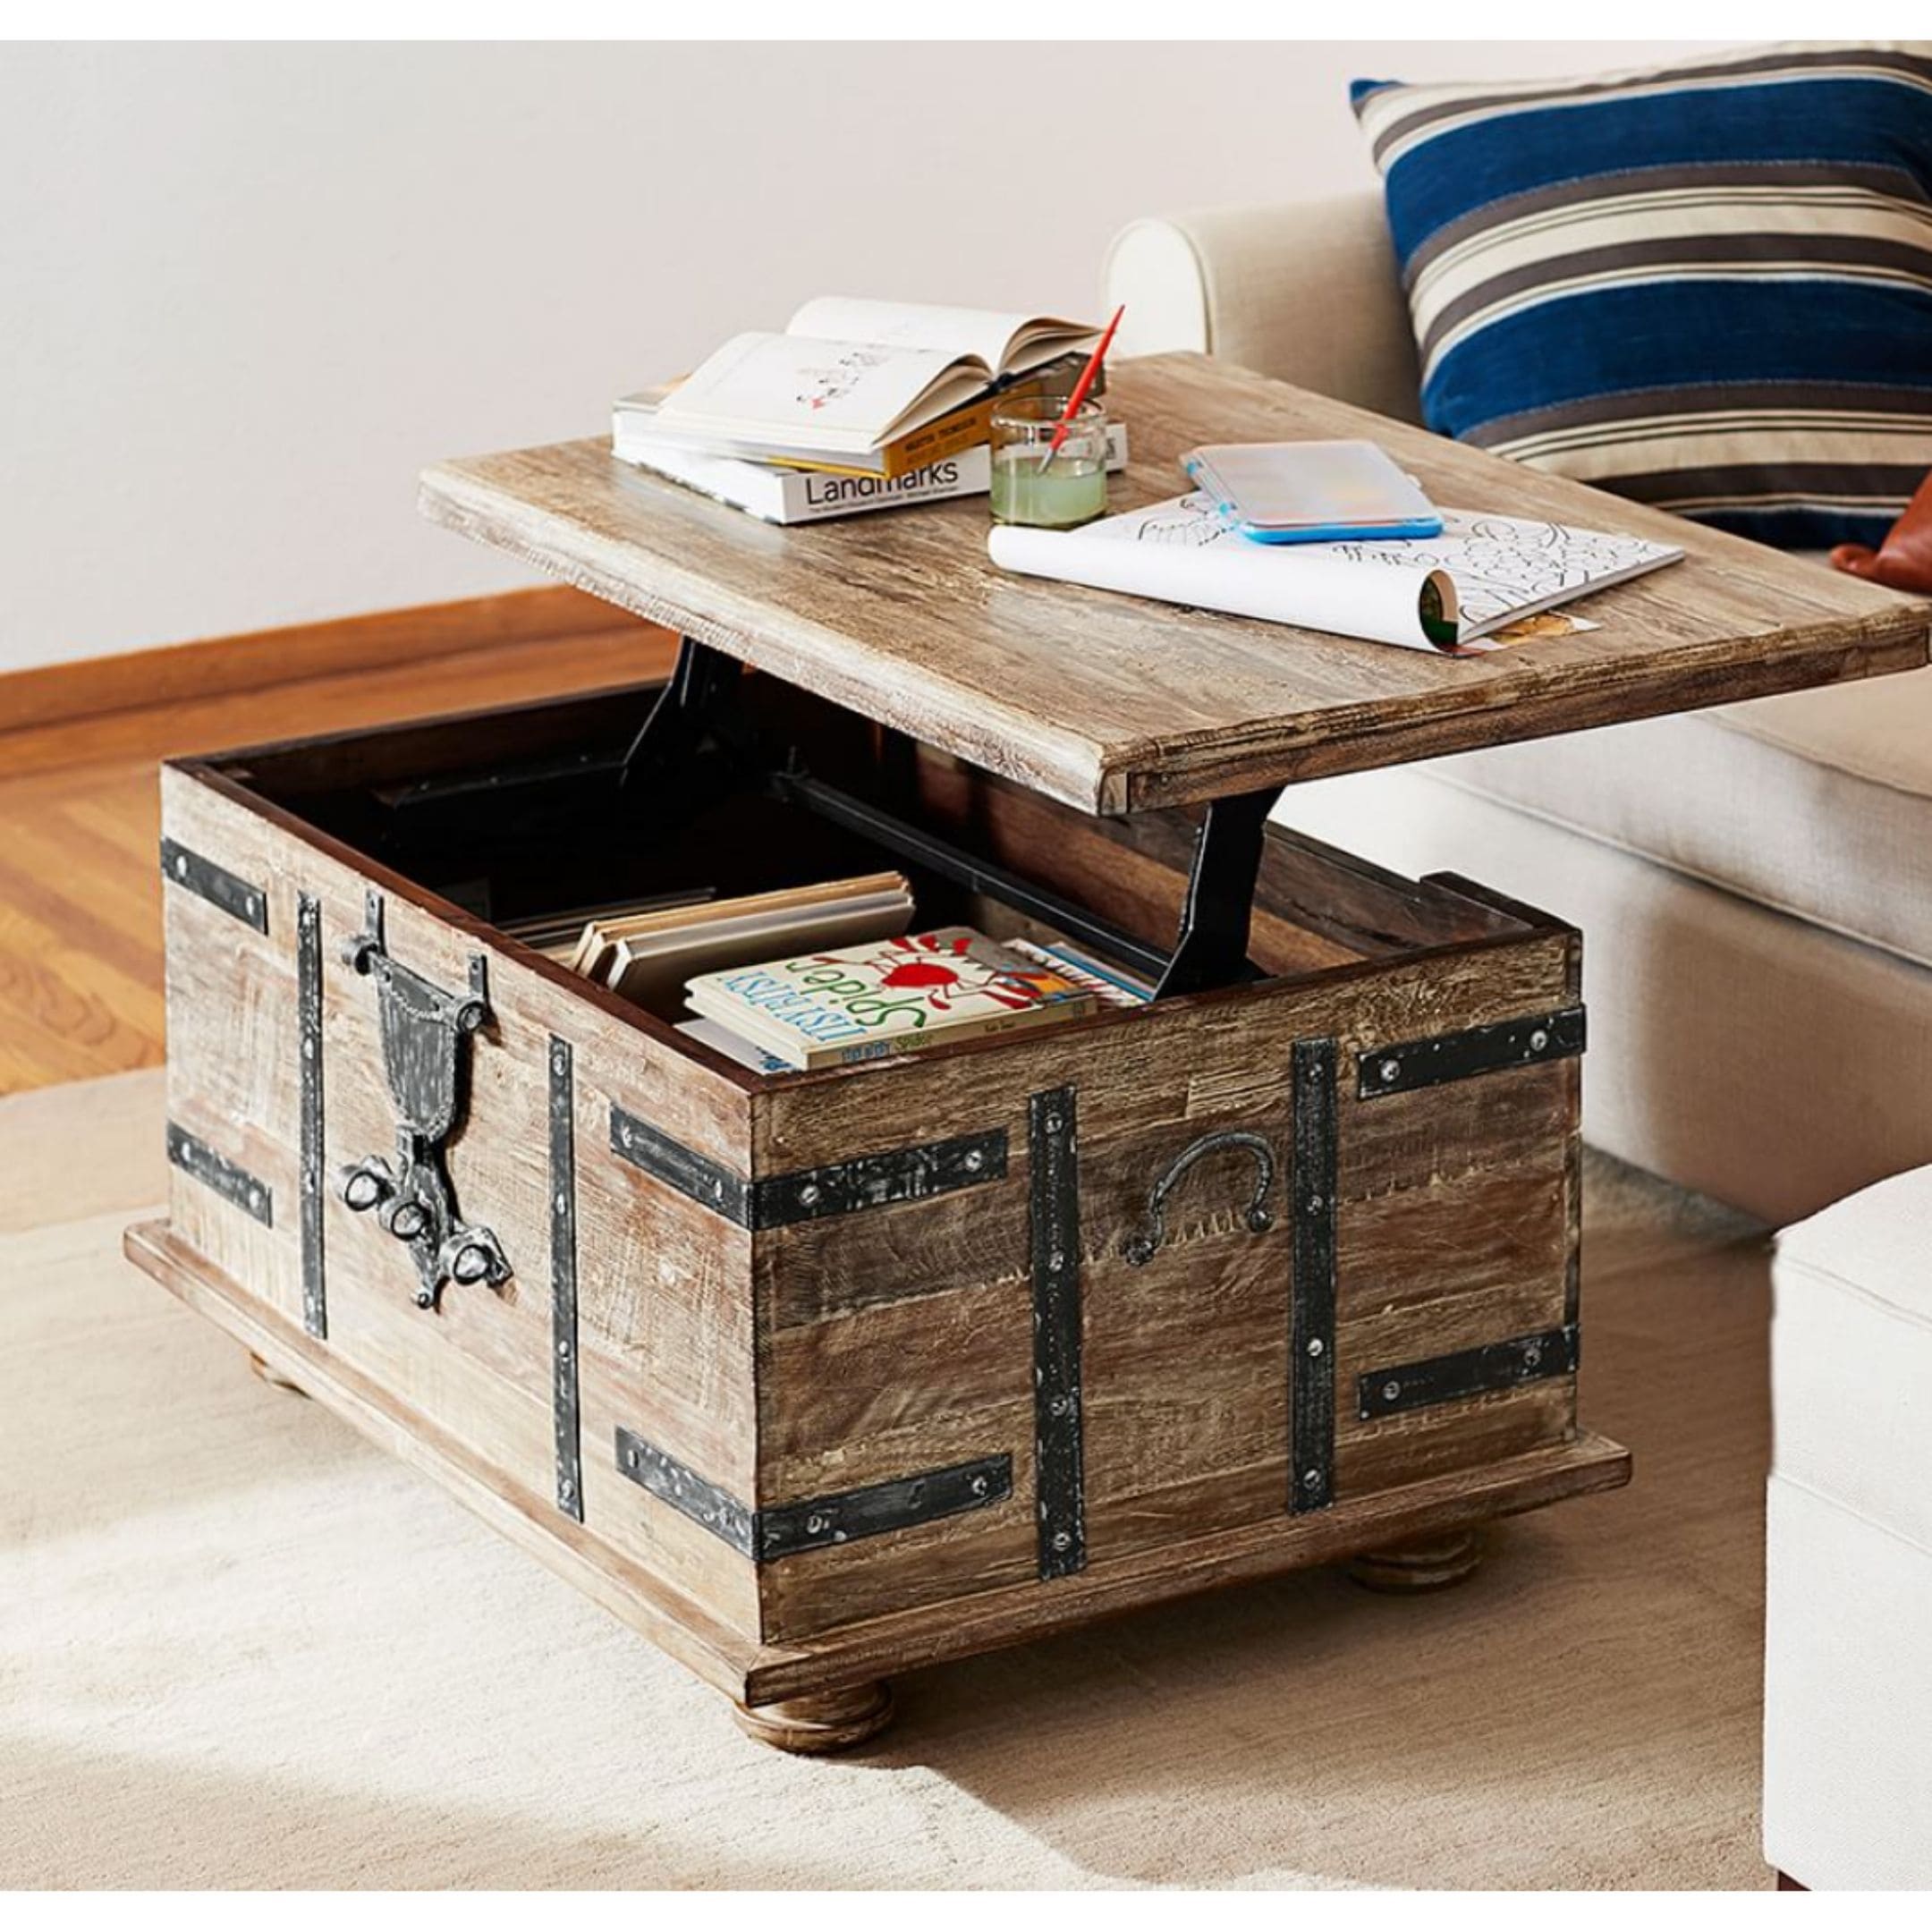 Treasure trunk coffee table with lift top for storage.